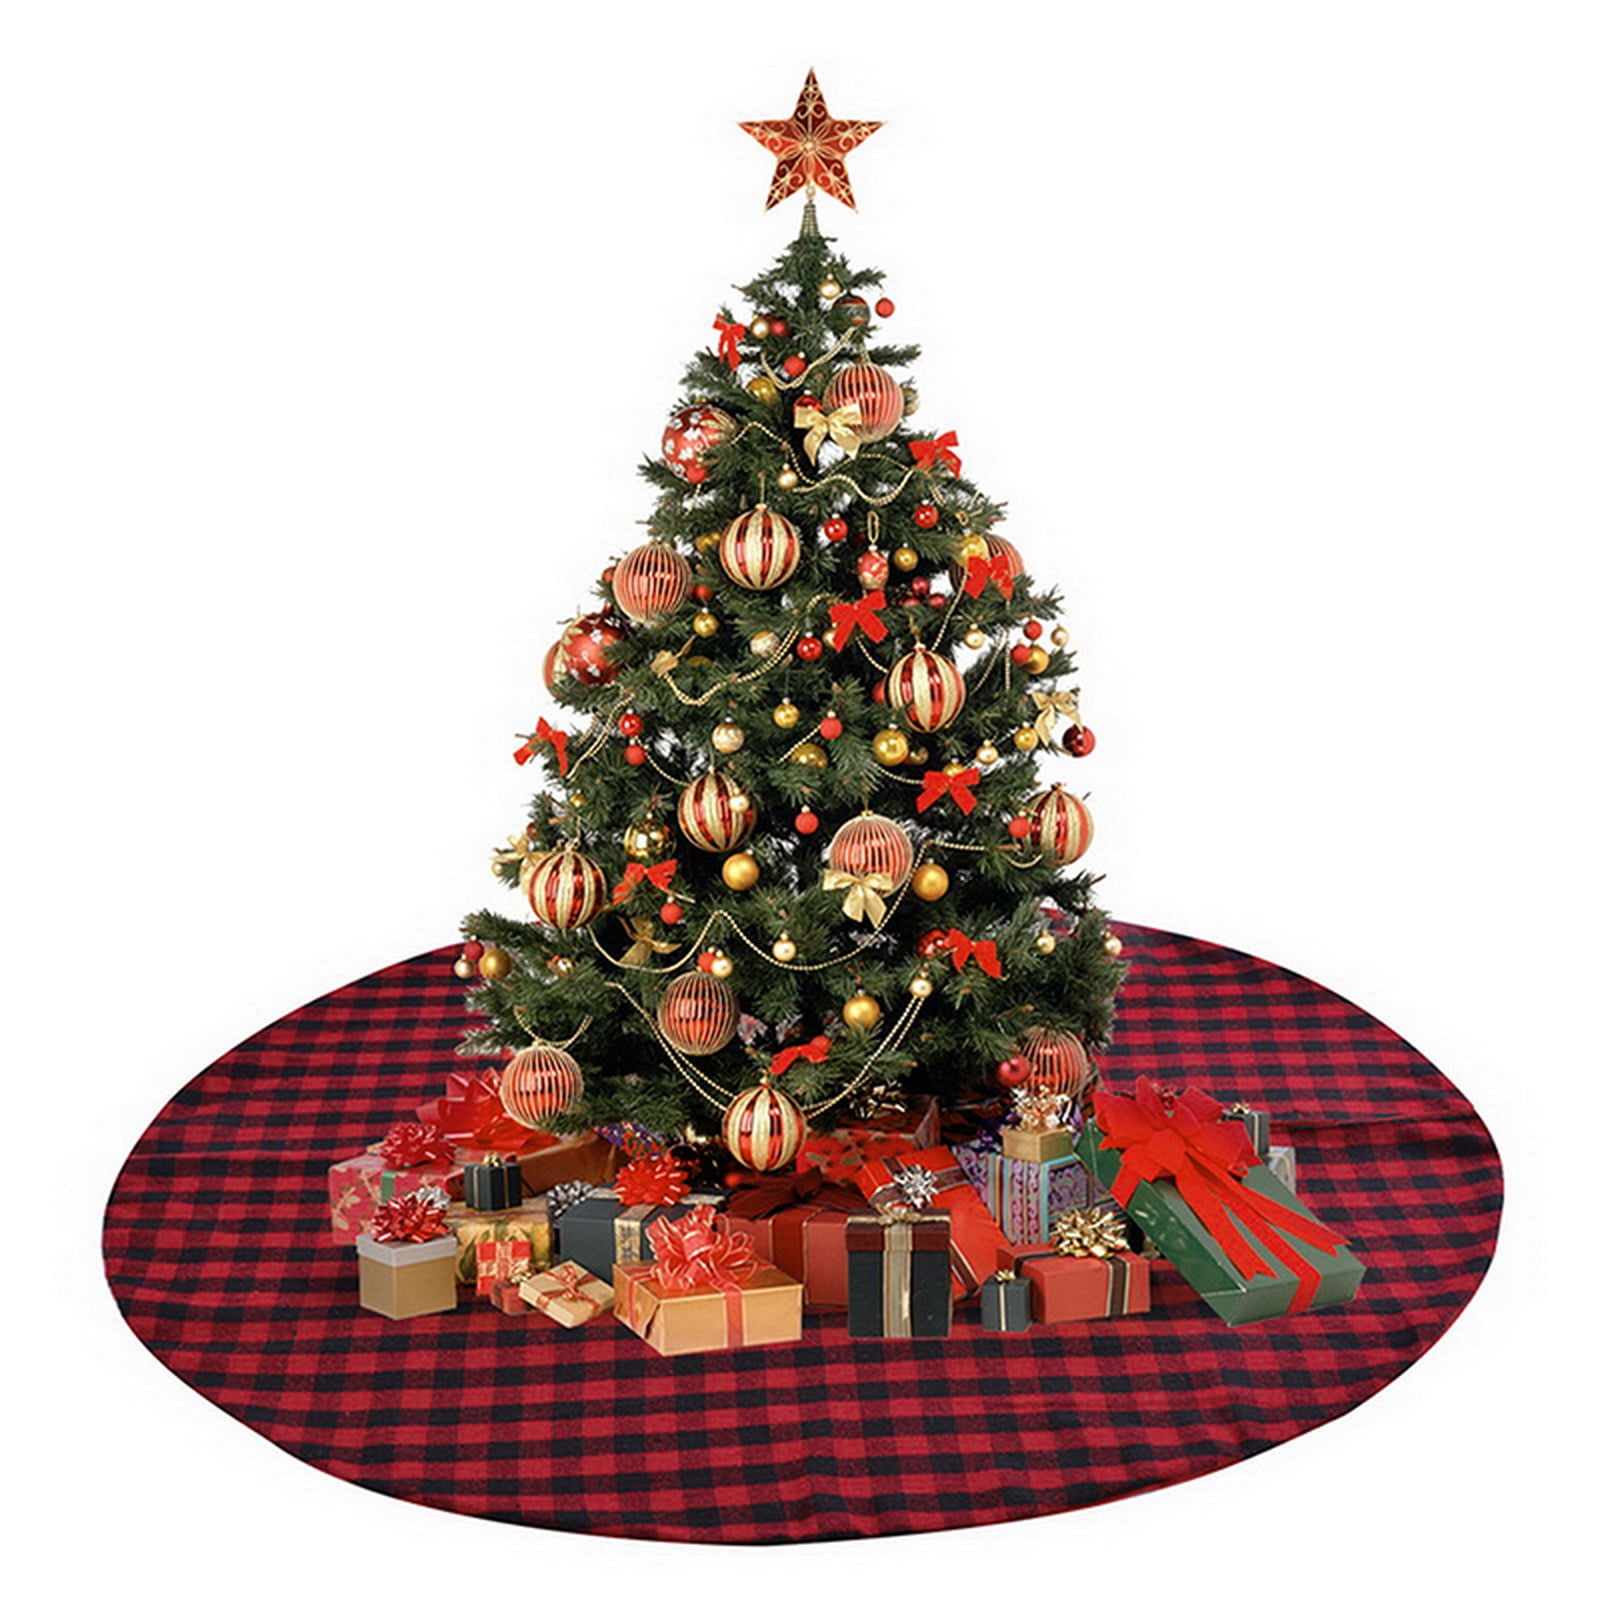 Souarts 48 Inches Christmas Tree Skirt Red and Black Plaid Christmas Decoration Ornaments Holiday Party Mat Xmas Buffalo Double Layers